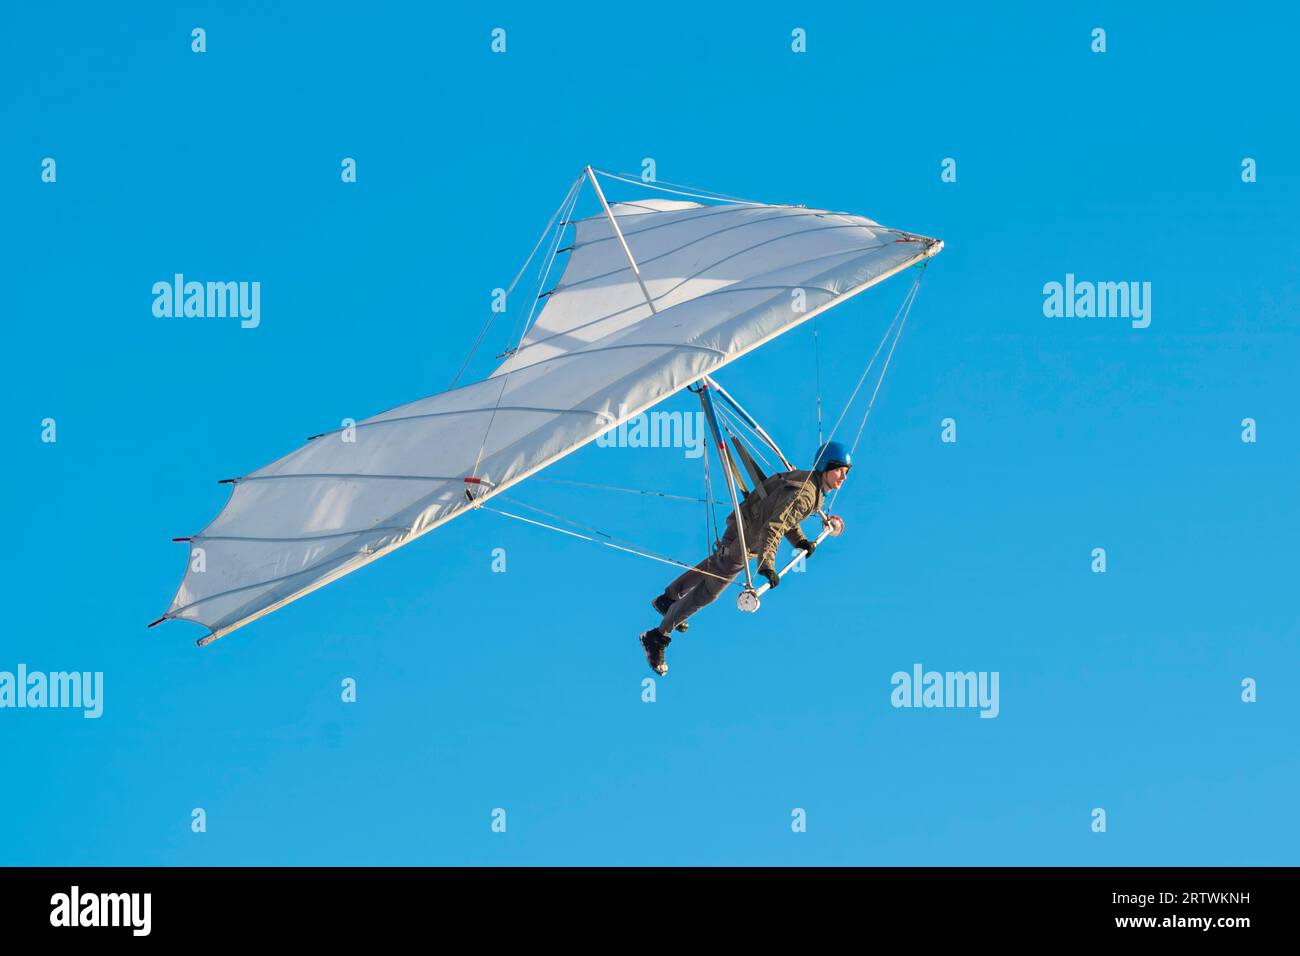 Student learning to fly on white rogallo hang glider wing Stock Photo